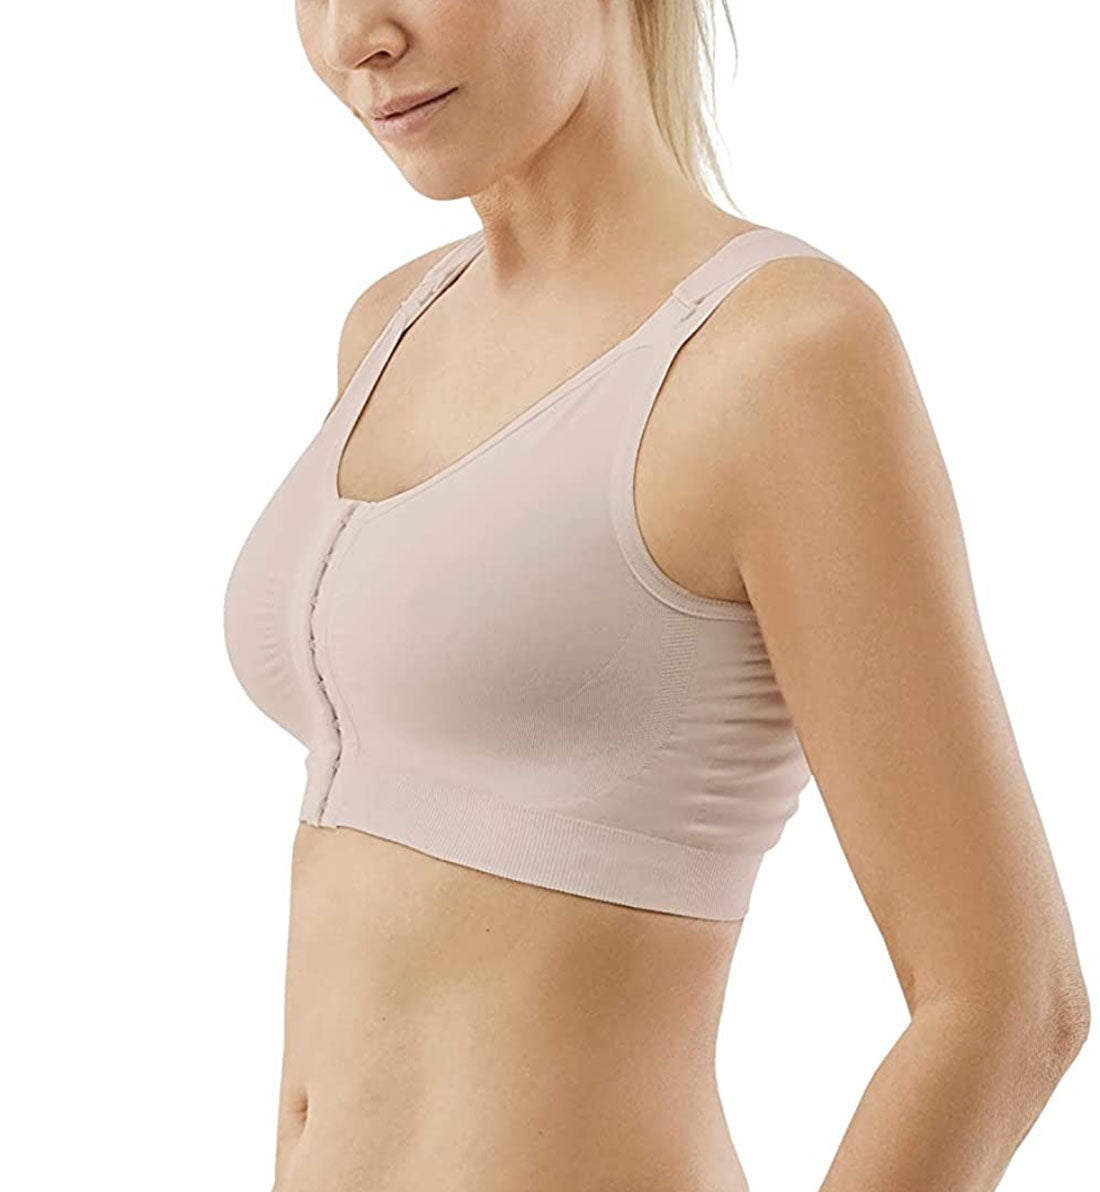 Carefix Bree Post-Op Wire Free Front Close Recovery Bra (3831),Small,Tan - Nude,Small